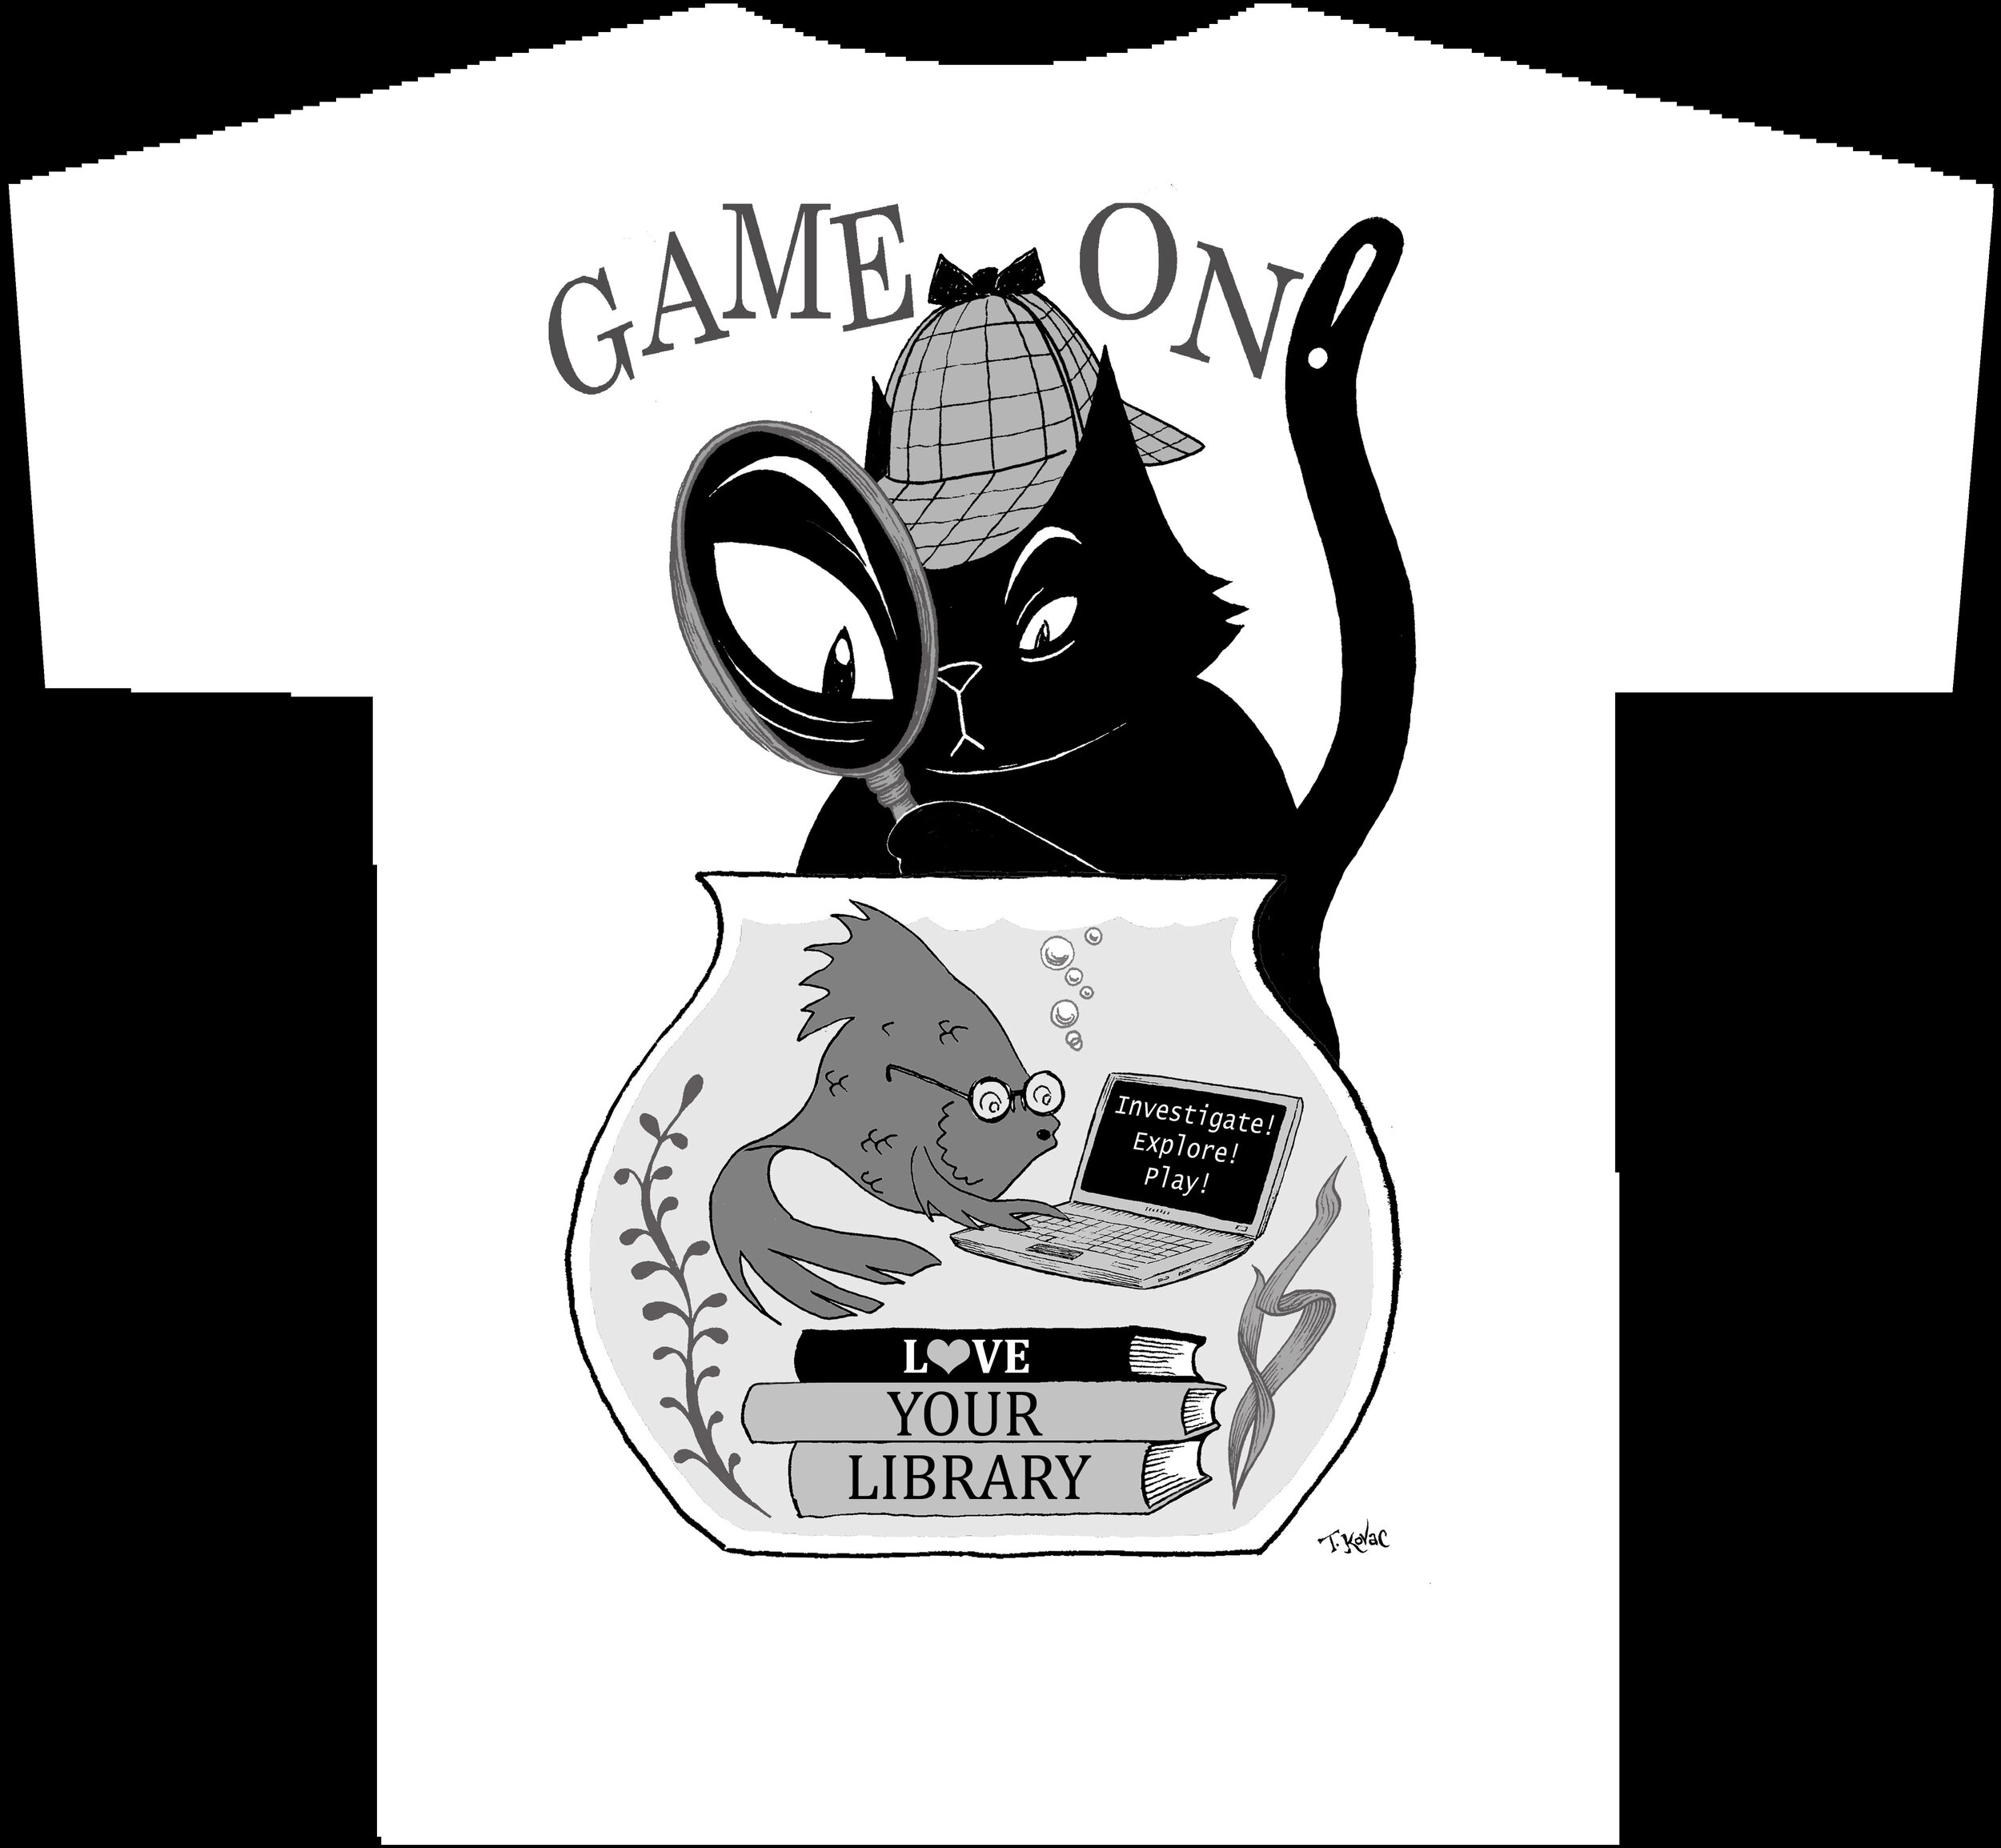 GAME ON LIBRARY Standard T